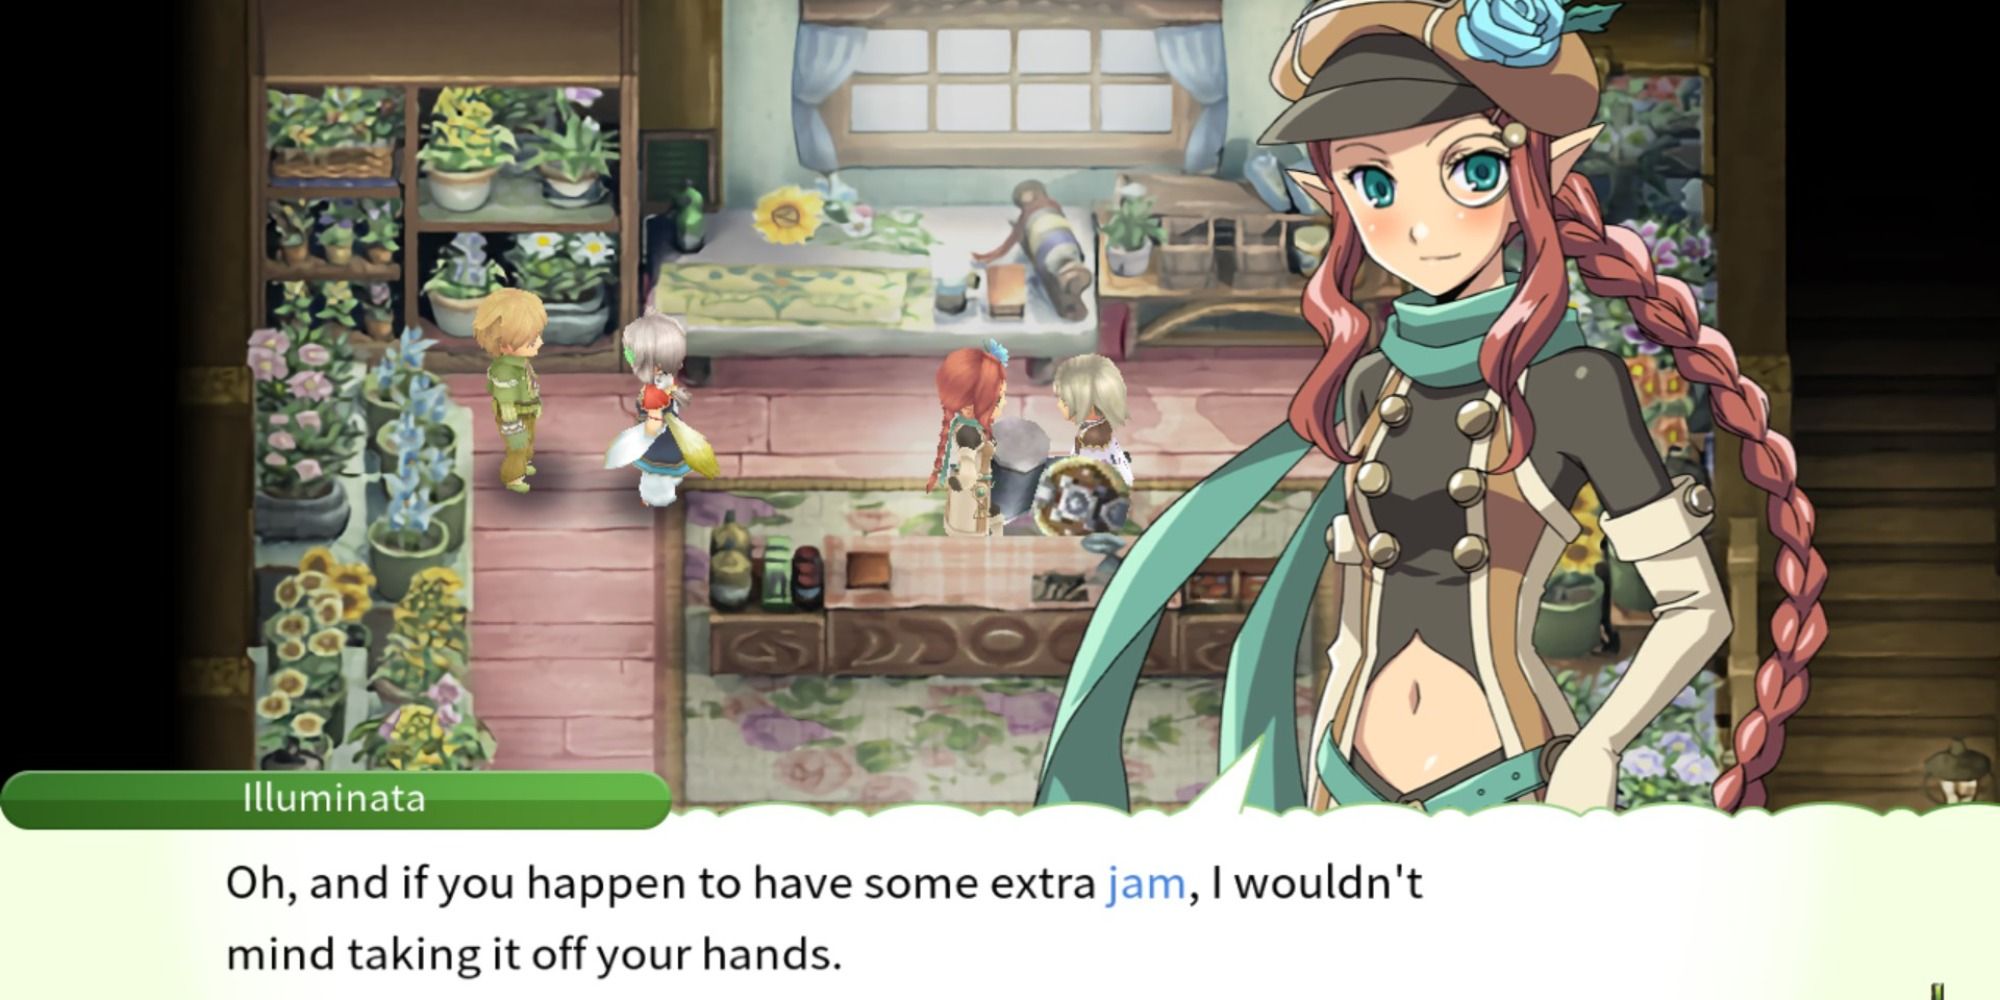 Giving a gift to Illuminata in Rune Factory 4 Special